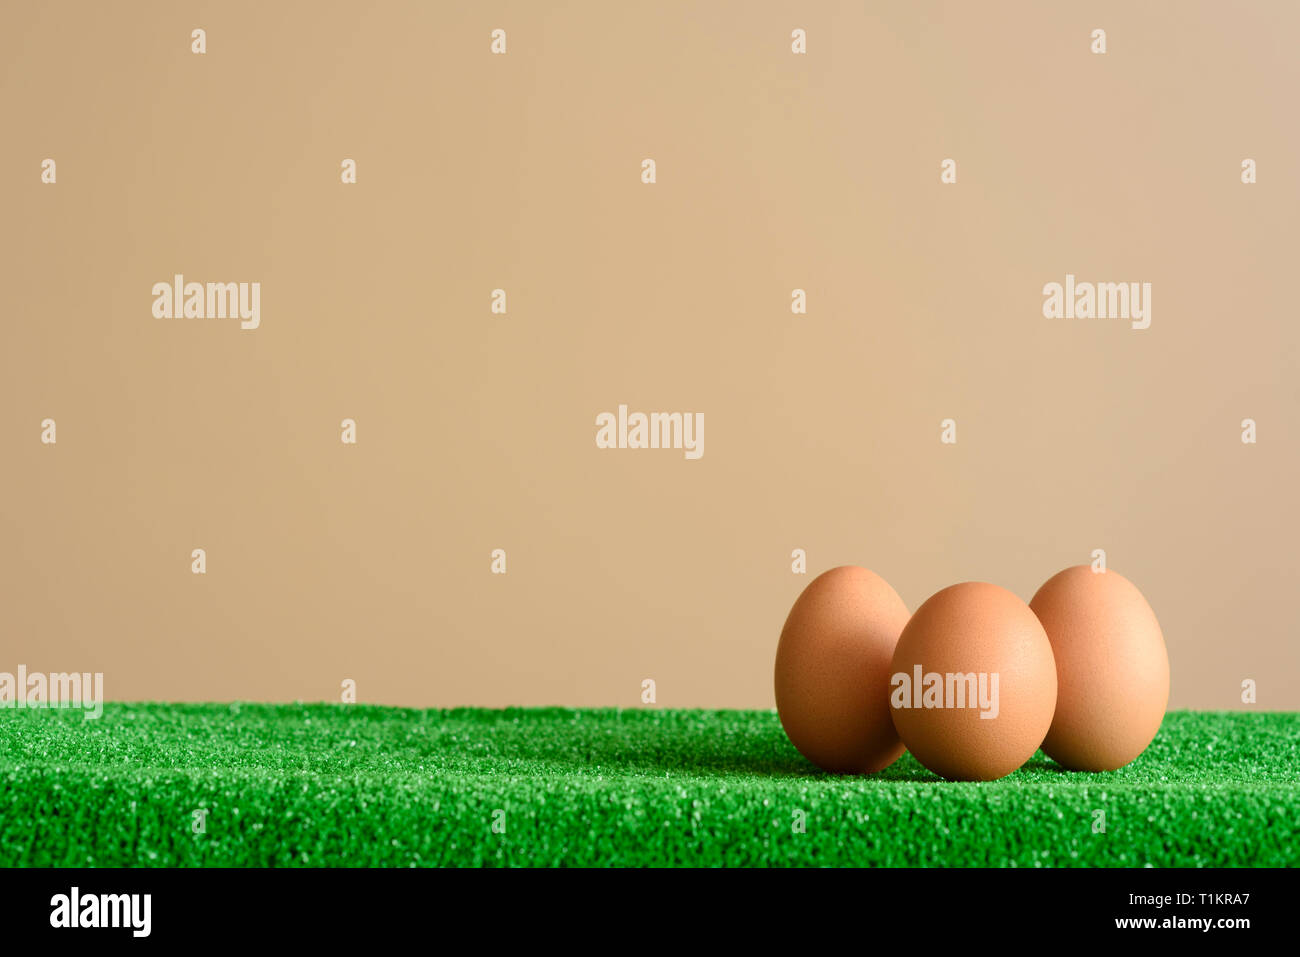 Three organic eggs, on a green grass surface, with a brown background. Easter concept. Stock Photo